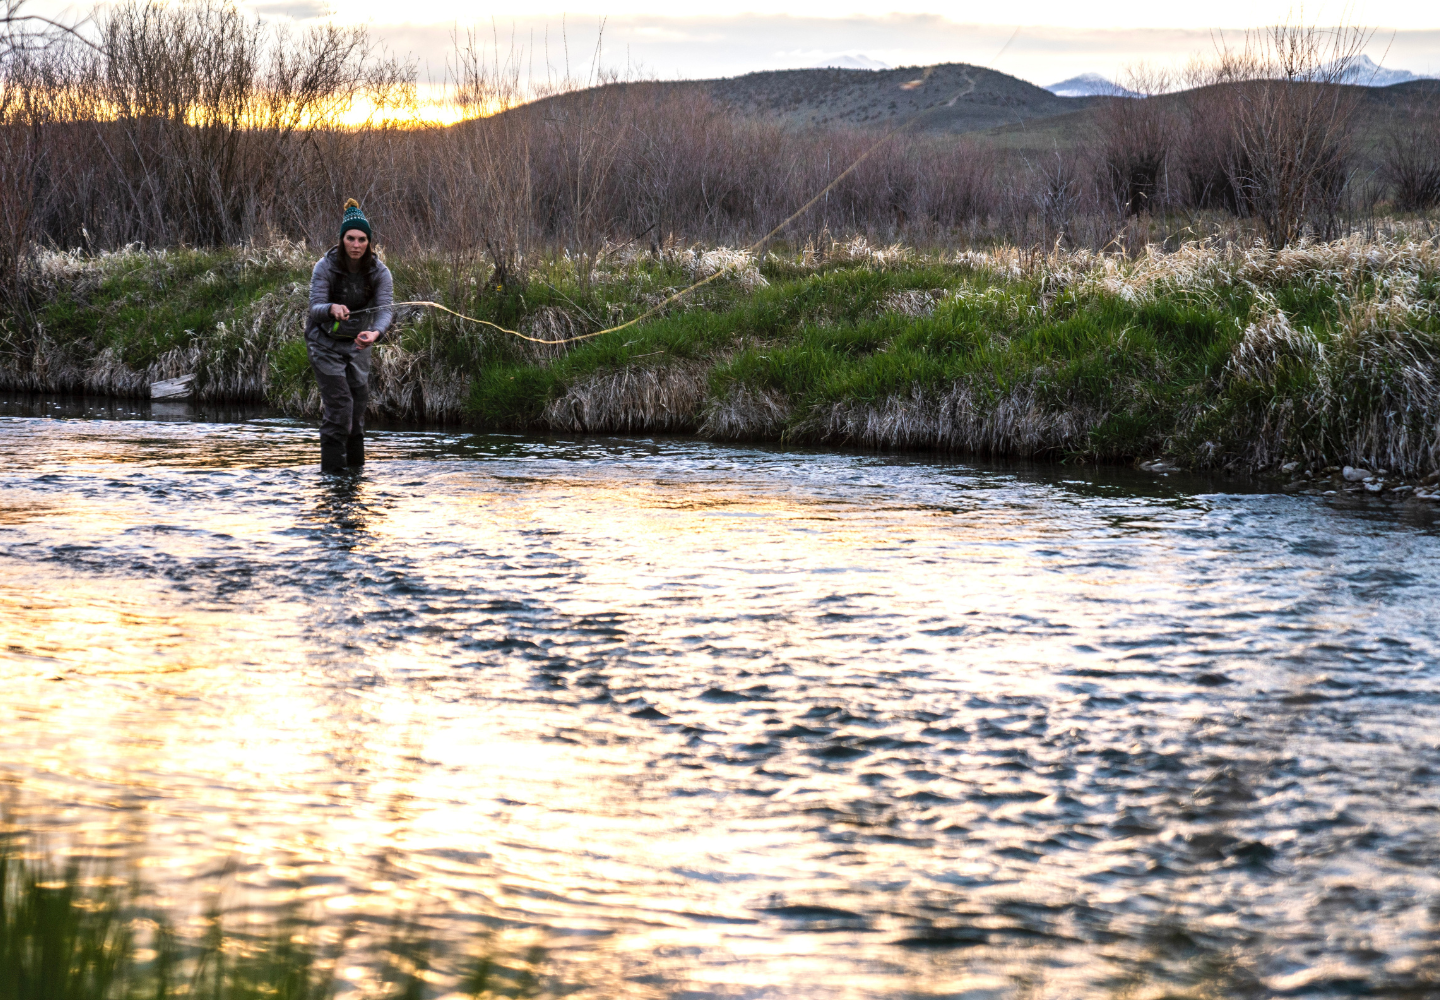 Fly angler casts fly downstream while fly fishing for trout